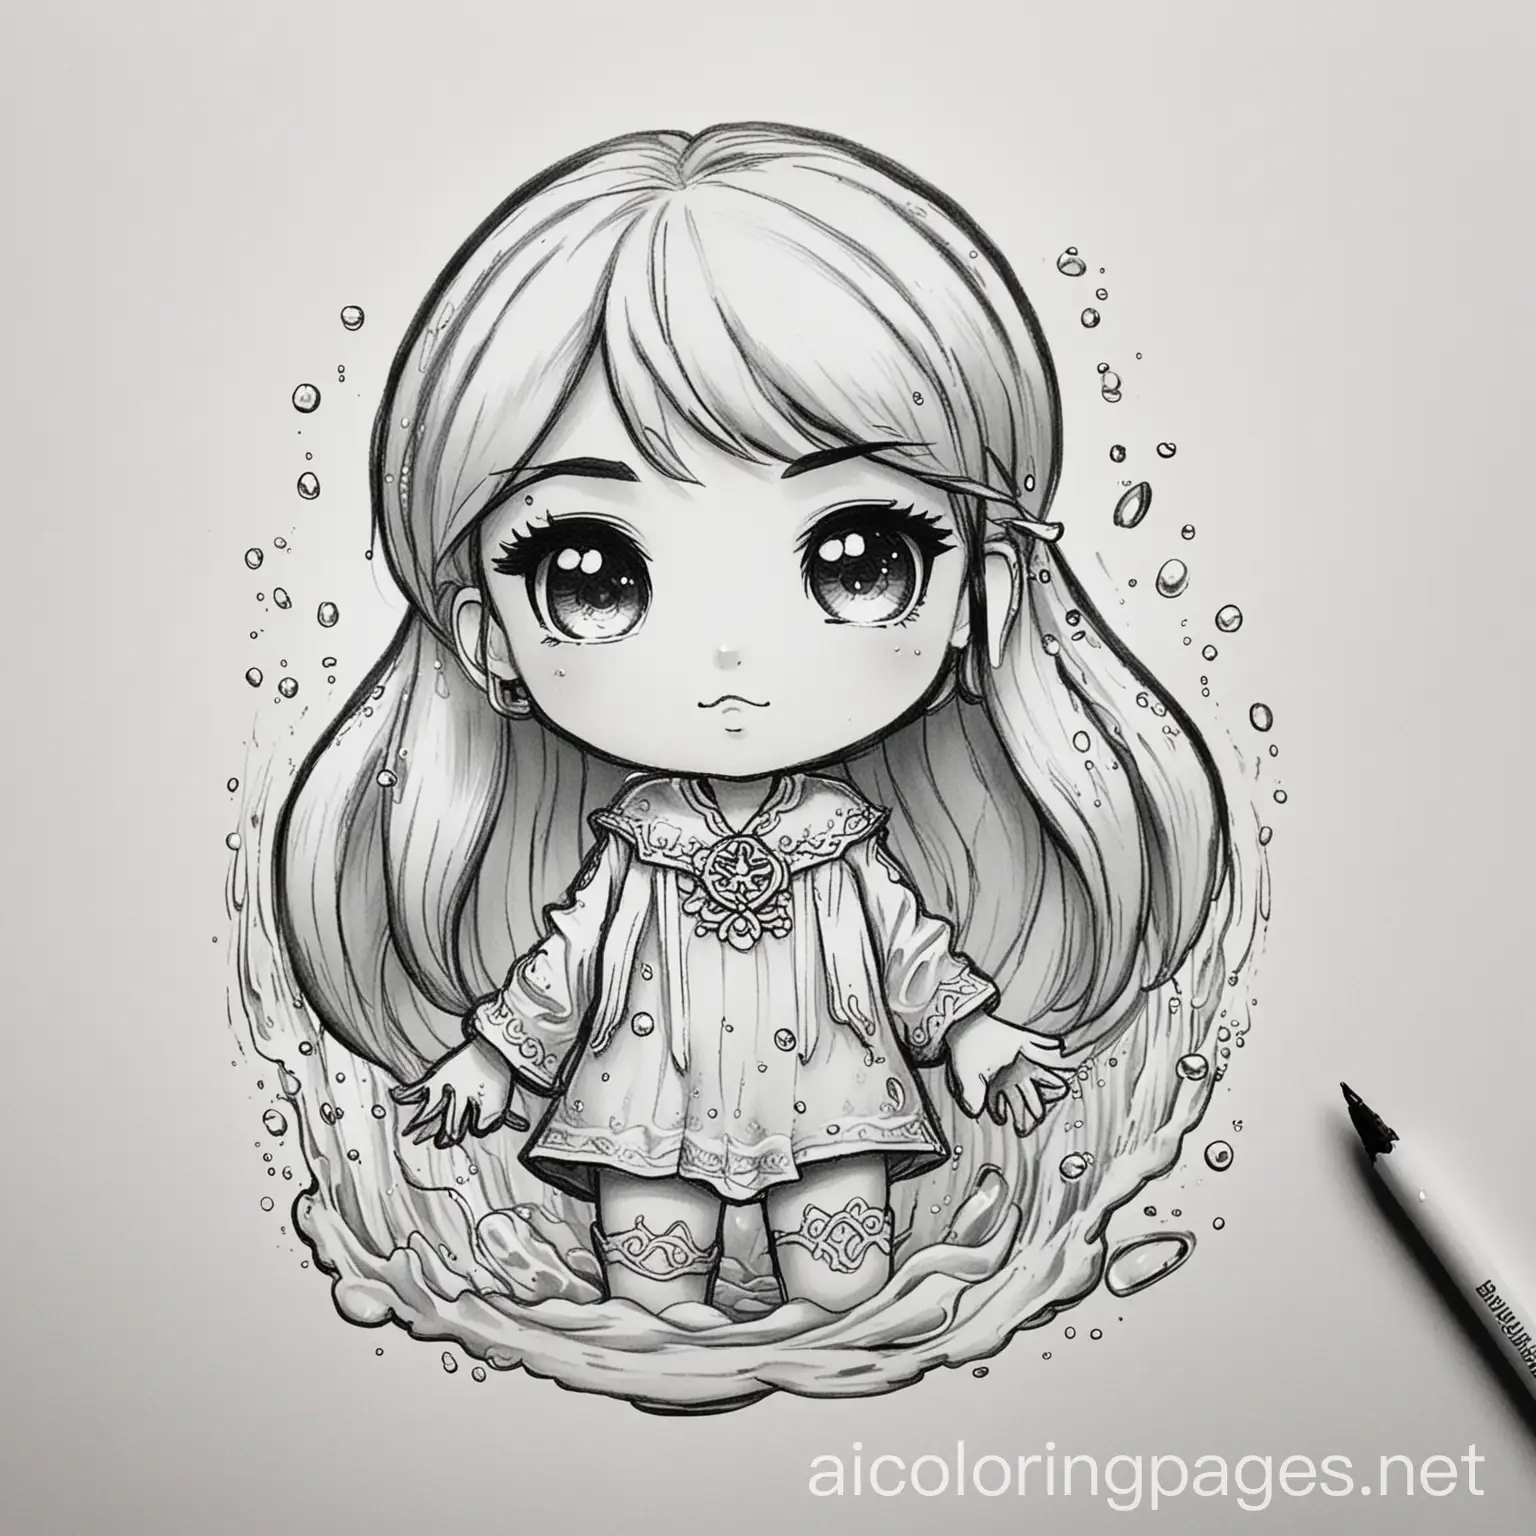 Chibi-Girl-with-Water-Elemental-Powers-Coloring-Page